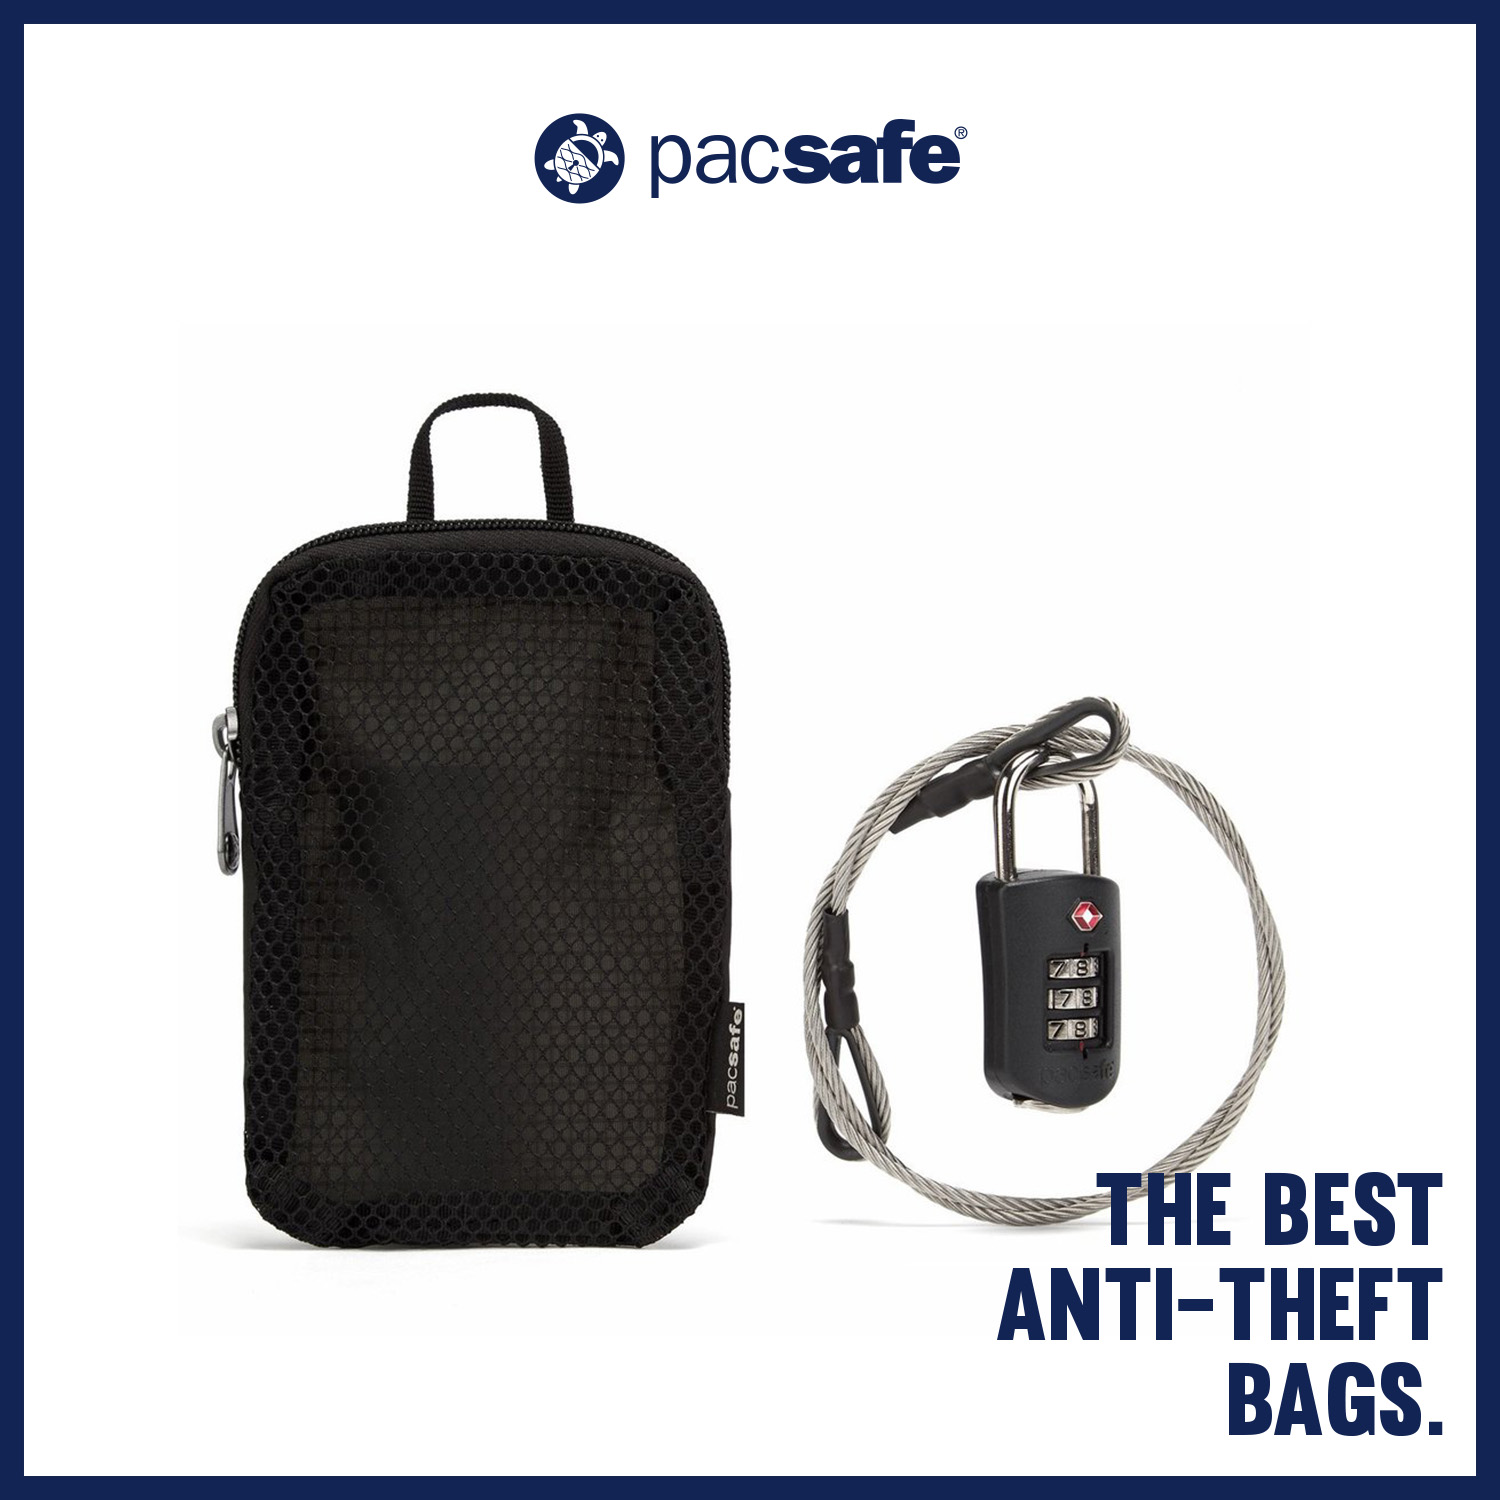 Pacsafe PROSAFE 1000 COMBINATION LOCK WITH STEEL CABLE ANTI-THEFT  กุญแจล็อคกระเป๋า กันขโมย